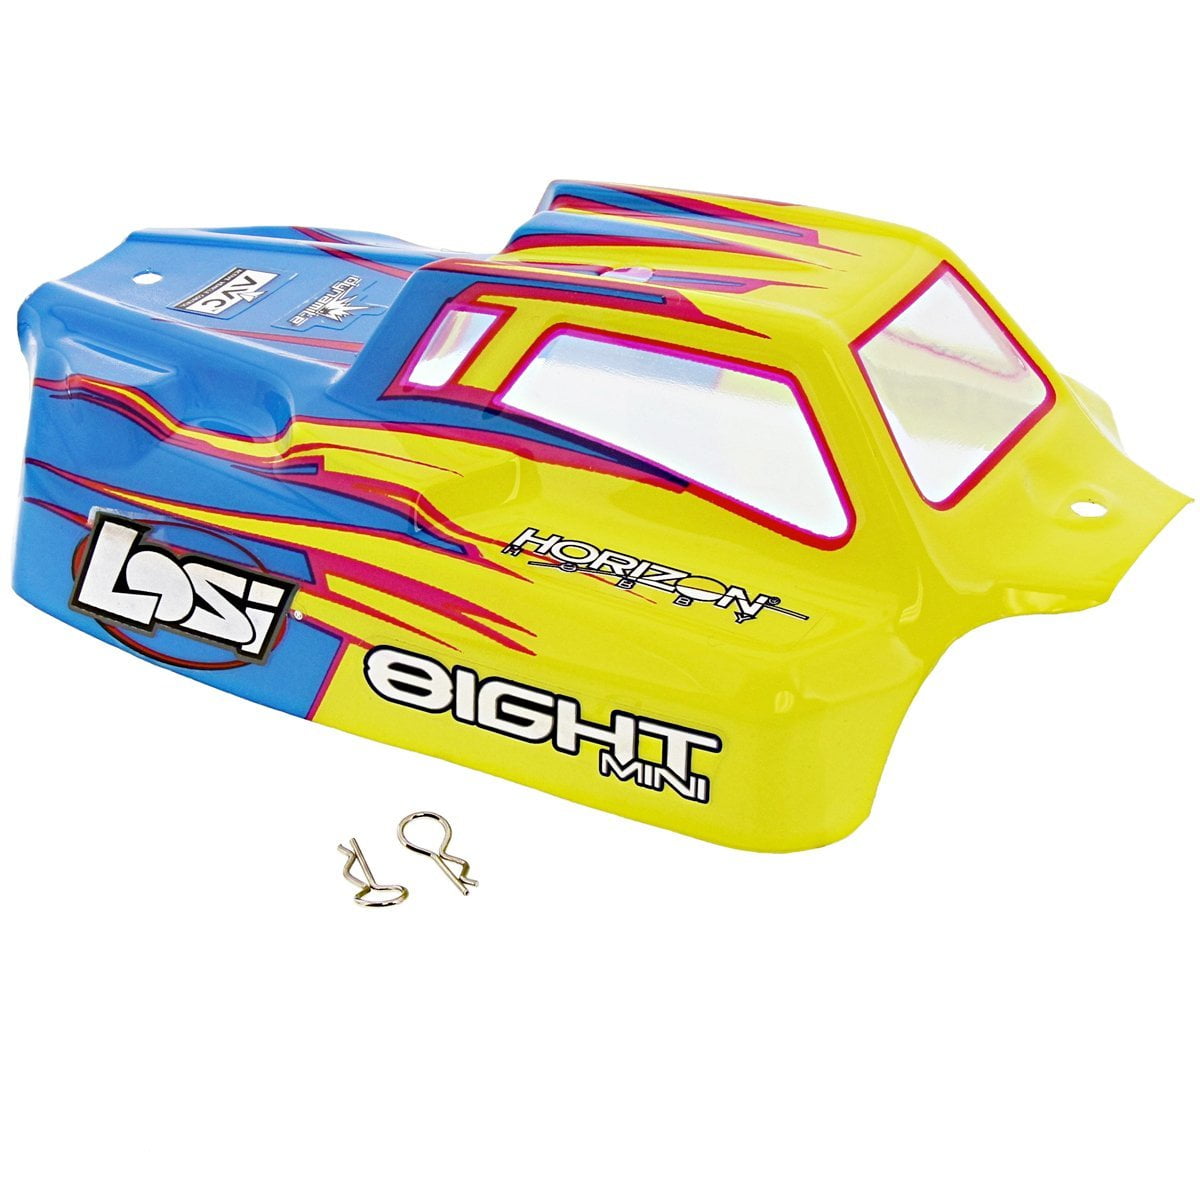 Losi 1 14 Mini 8ight Buggy Yellow Amp Blue Body Shell Amp Clips Painted Decals Walmart Com